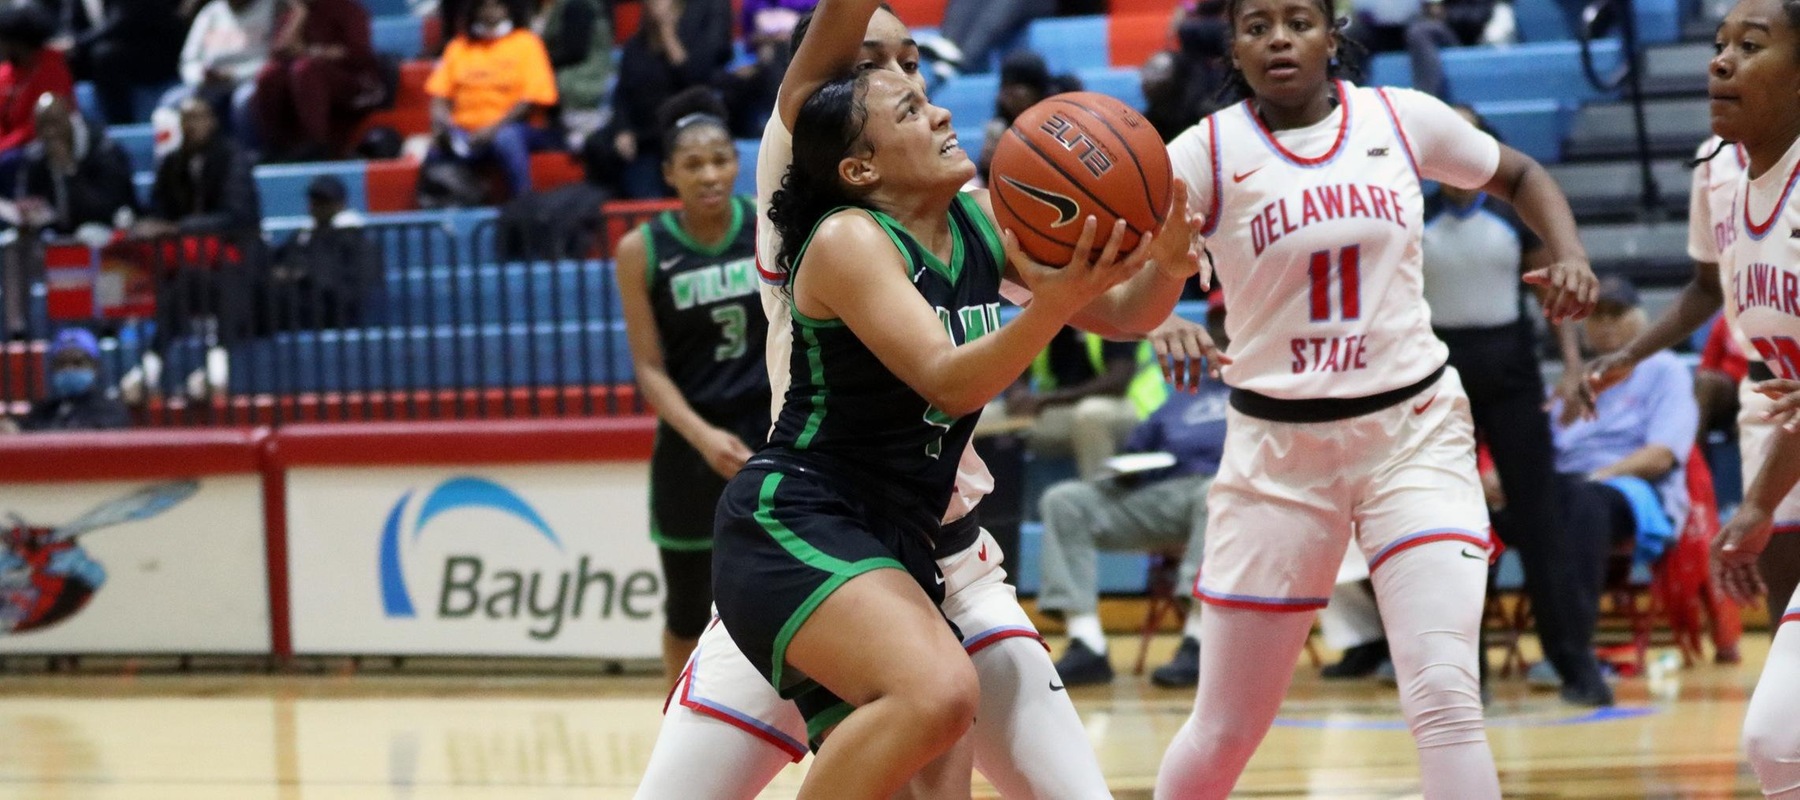 Photo of Amber Washington who led the team with 11 points at Delaware State. Copyright 2022; Wilmington University. All rights reserved. Photo by Dan Lauletta. November 15, 2022 at Delaware State in Memorial Hall.